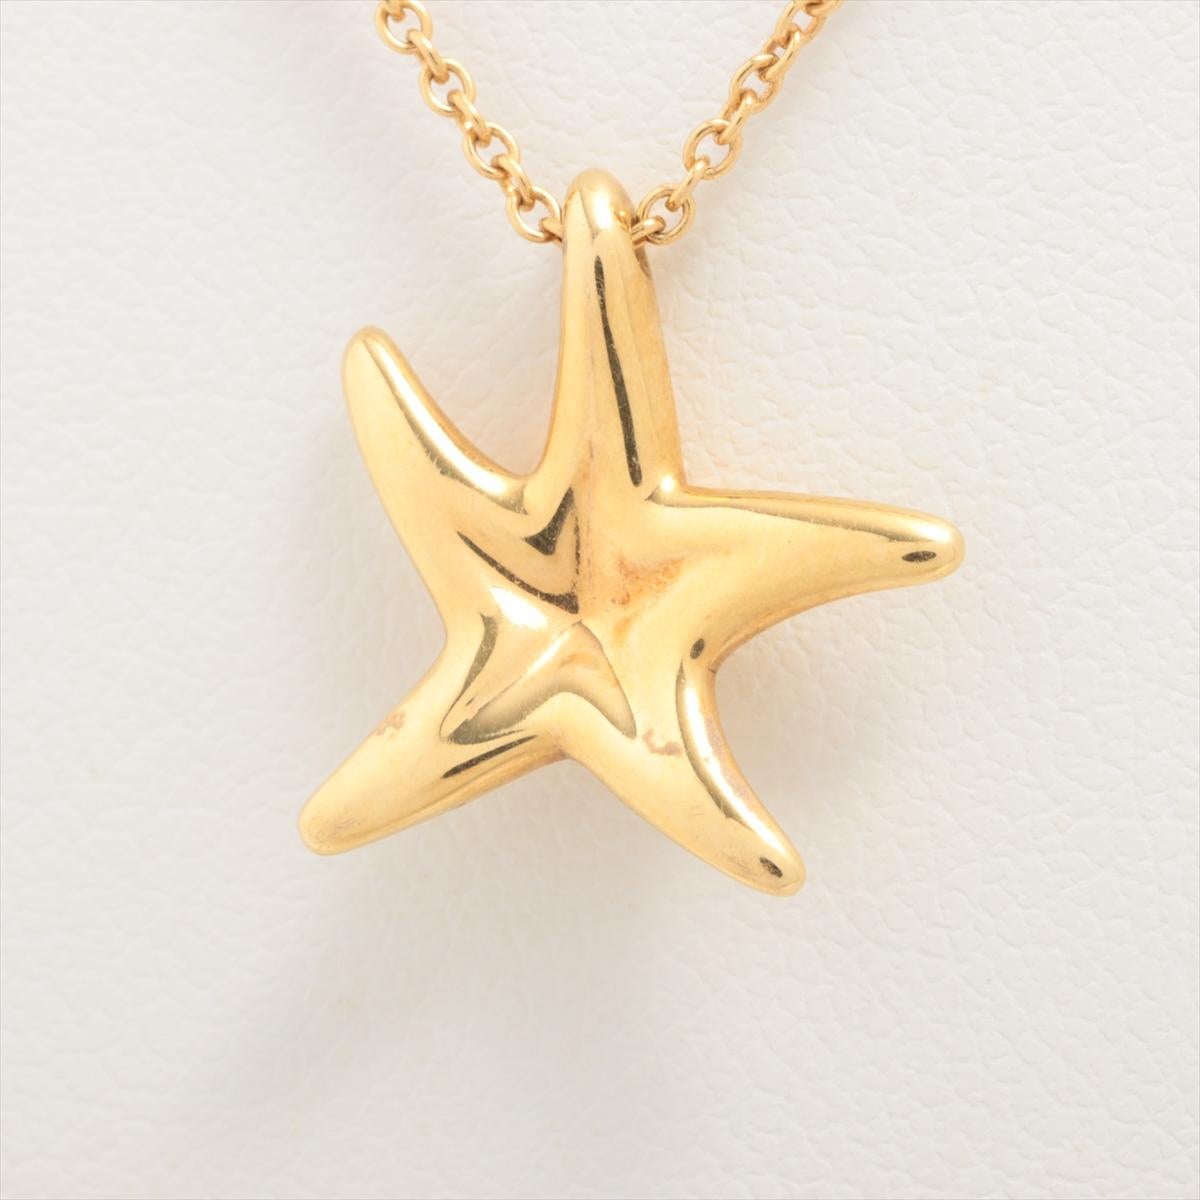 Tiffany & Co. Starfish Diamond Pendant Necklace Gold In Good Condition For Sale In Indianapolis, IN